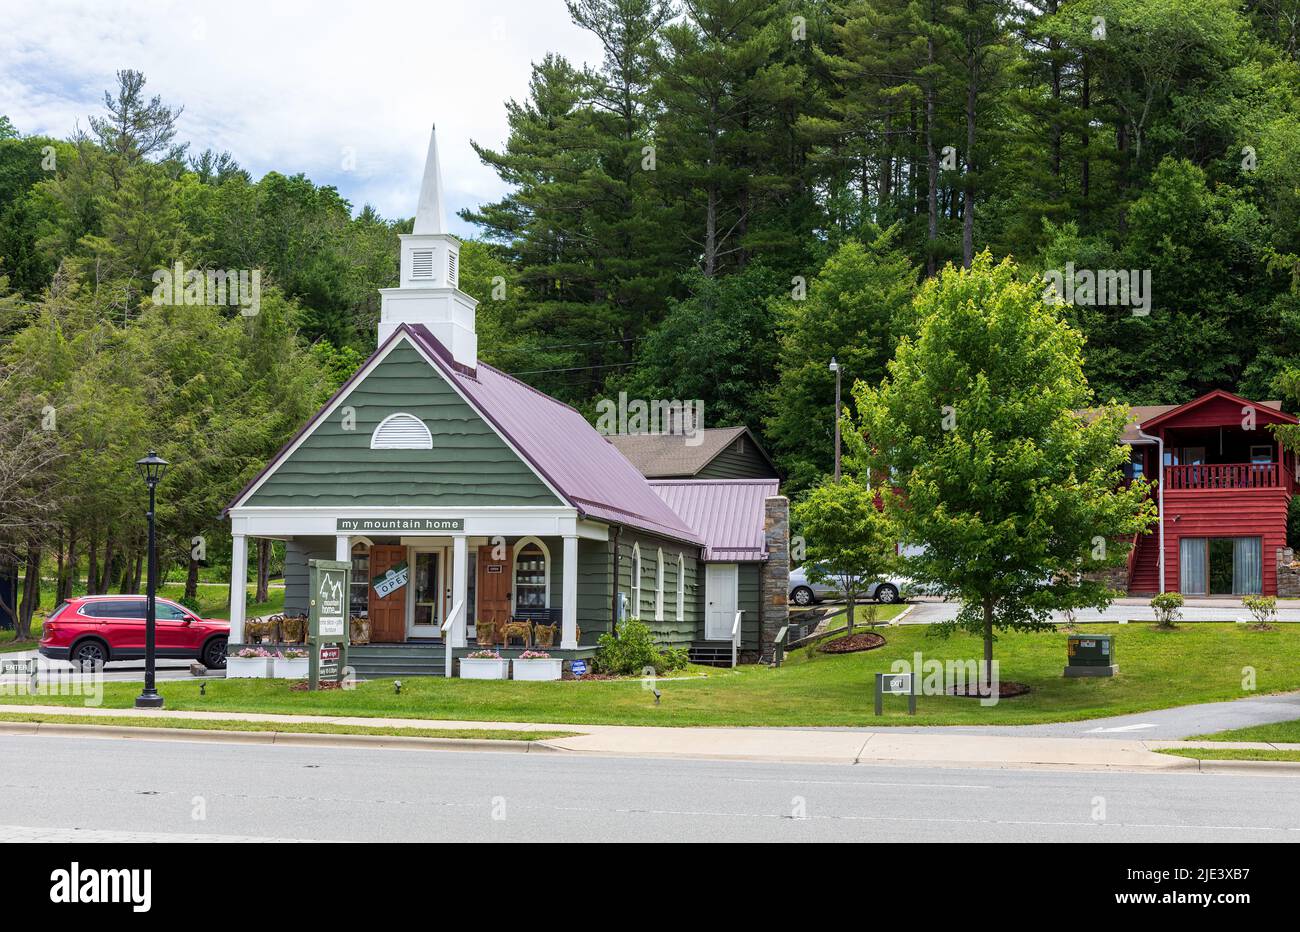 BLOWING ROCK, NC, USA-20 JUNE 2022: My Mountain Home, home decor shop on US 321, with residence seen in back. Stock Photo